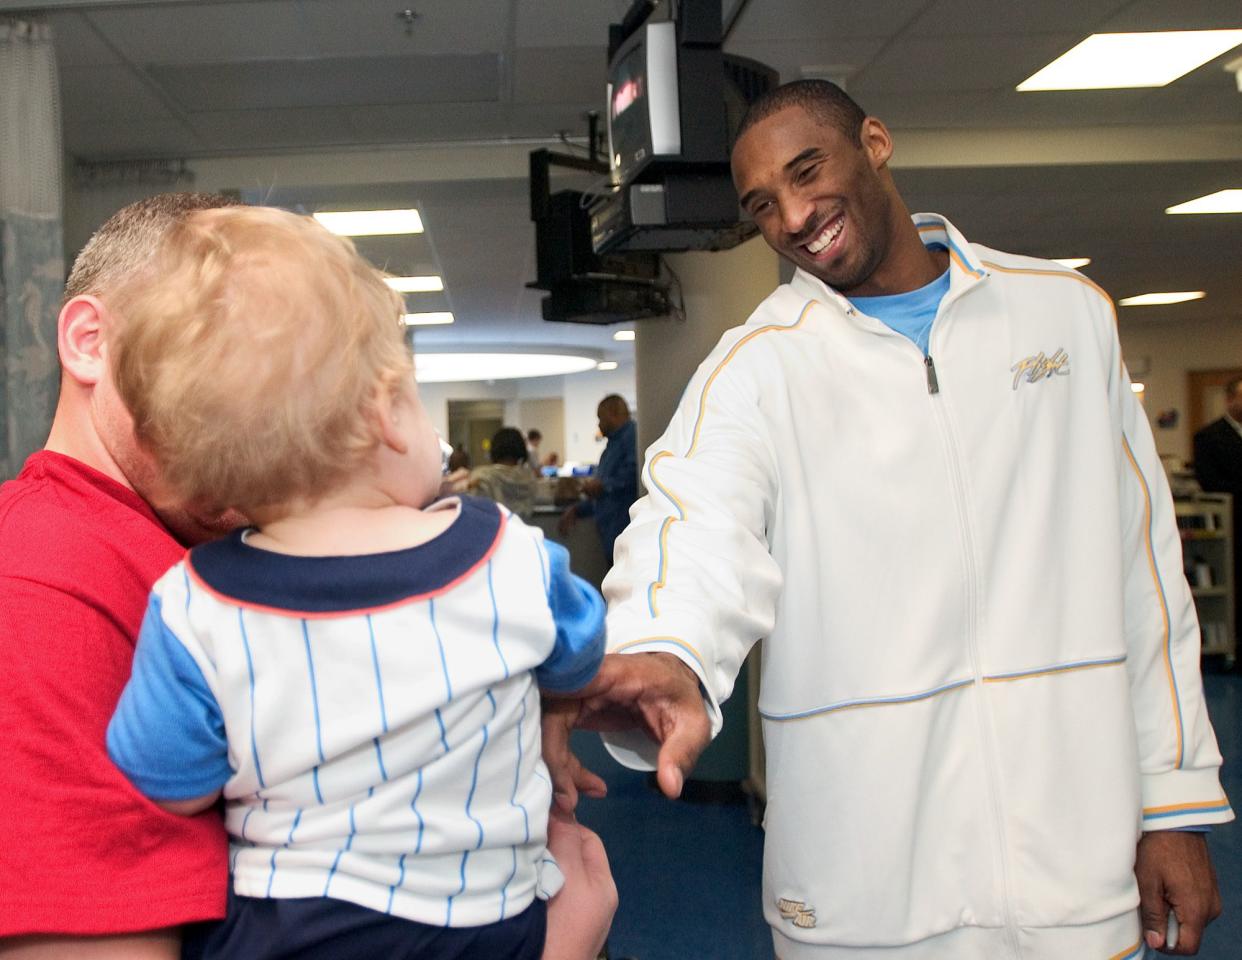 Los Angeles Lakers' Kobe Bryant smiles at 19-month-old Anne Raegan during a visit to  St. Jude Children's Research Hospital in Memphis, Tenn., Sunday April 3, 2005. The Lakers were in Memphis to play against the Memphis Grizzlies. Bryant is out with a leg injury.